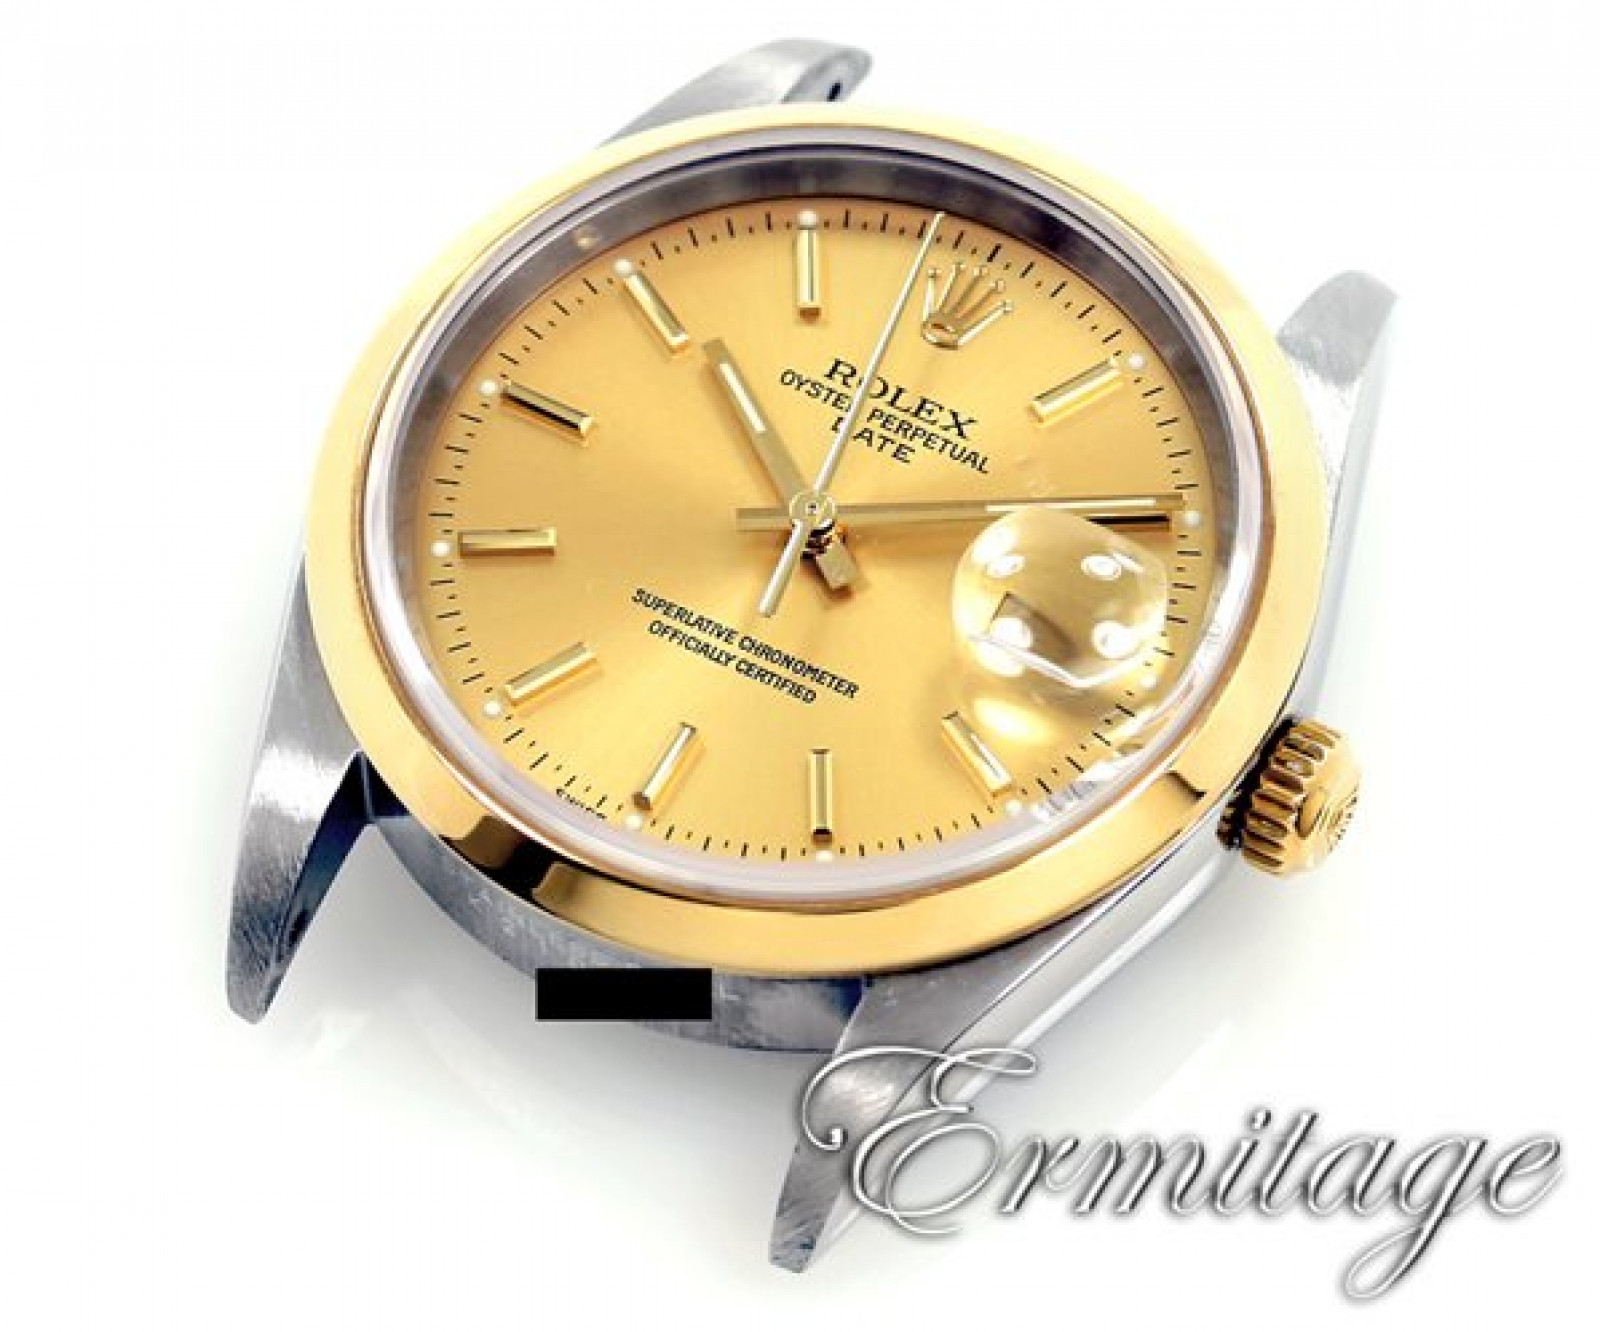 Rolex Oyster Perpetual Date 15203 Gold & Steel